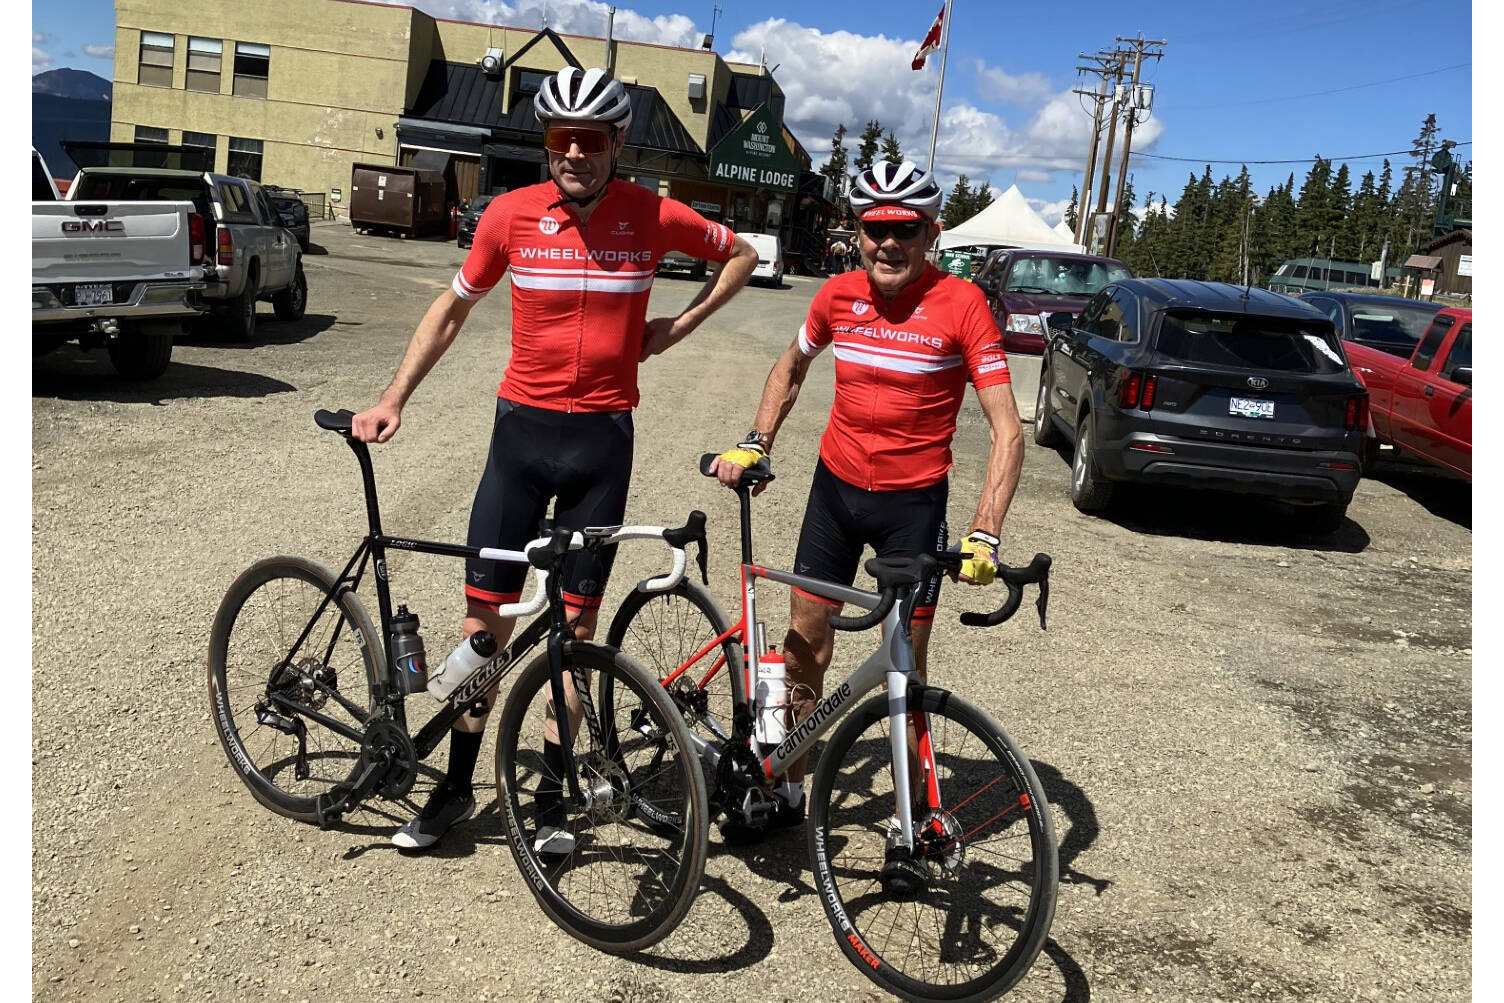 Roger (right) and Tristan Thomas pose for a shot at the Alpine Lodge parking lot at the completion of their ascent up Mount Washington on Aug. 3. The father and son completed the ride in celebration of Roger’s 82nd birthday. Photo supplied.